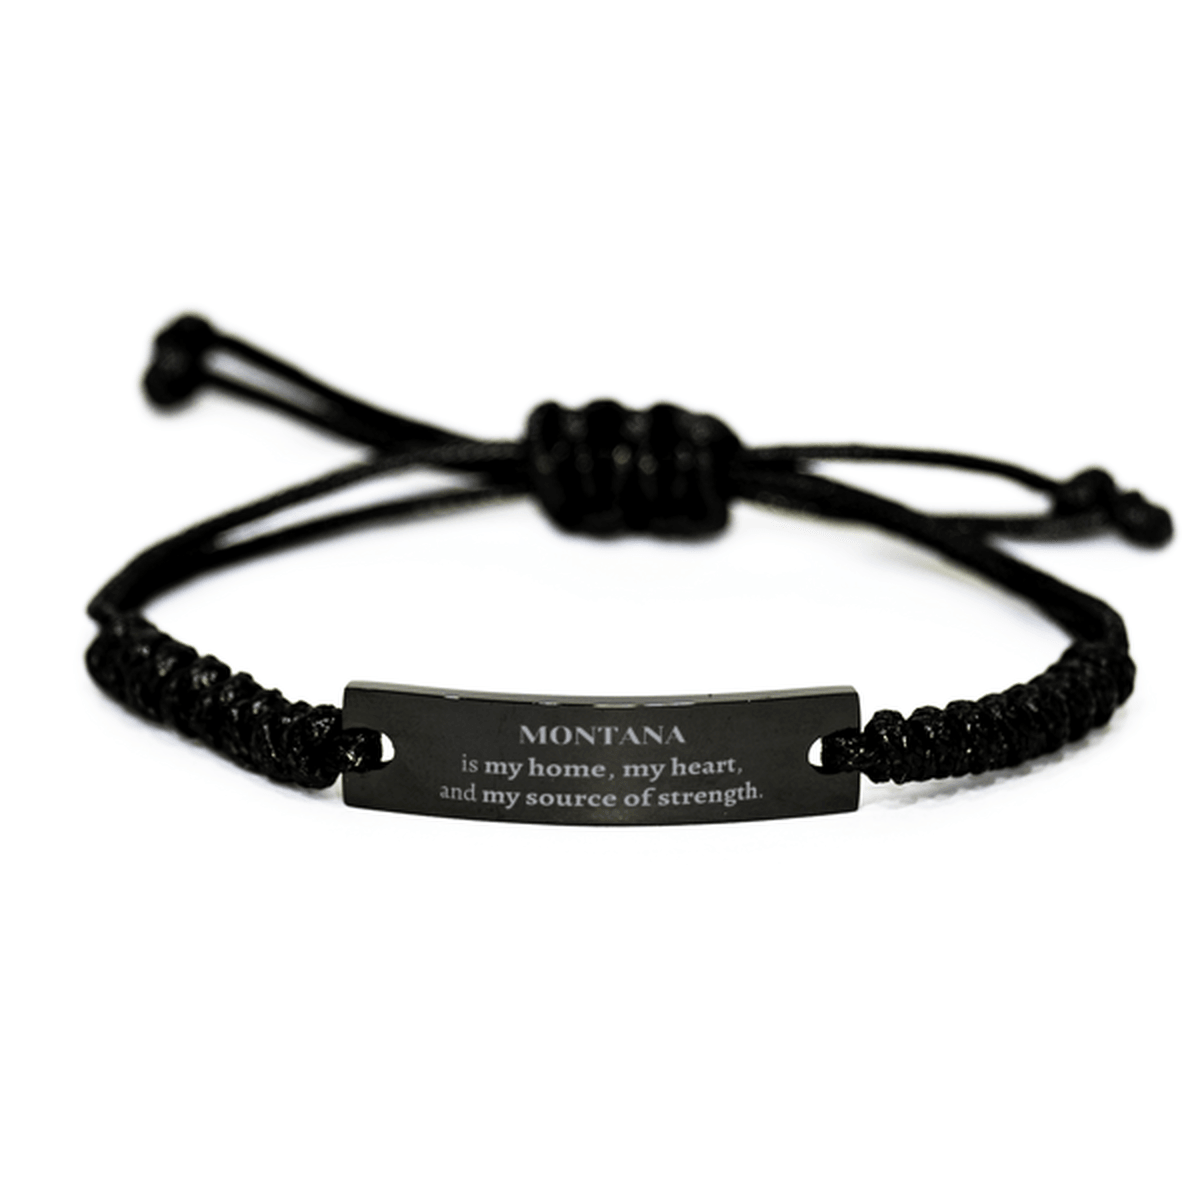 Montana is my home Gifts, Lovely Montana Birthday Christmas Black Rope Bracelet For People from Montana, Men, Women, Friends - Mallard Moon Gift Shop